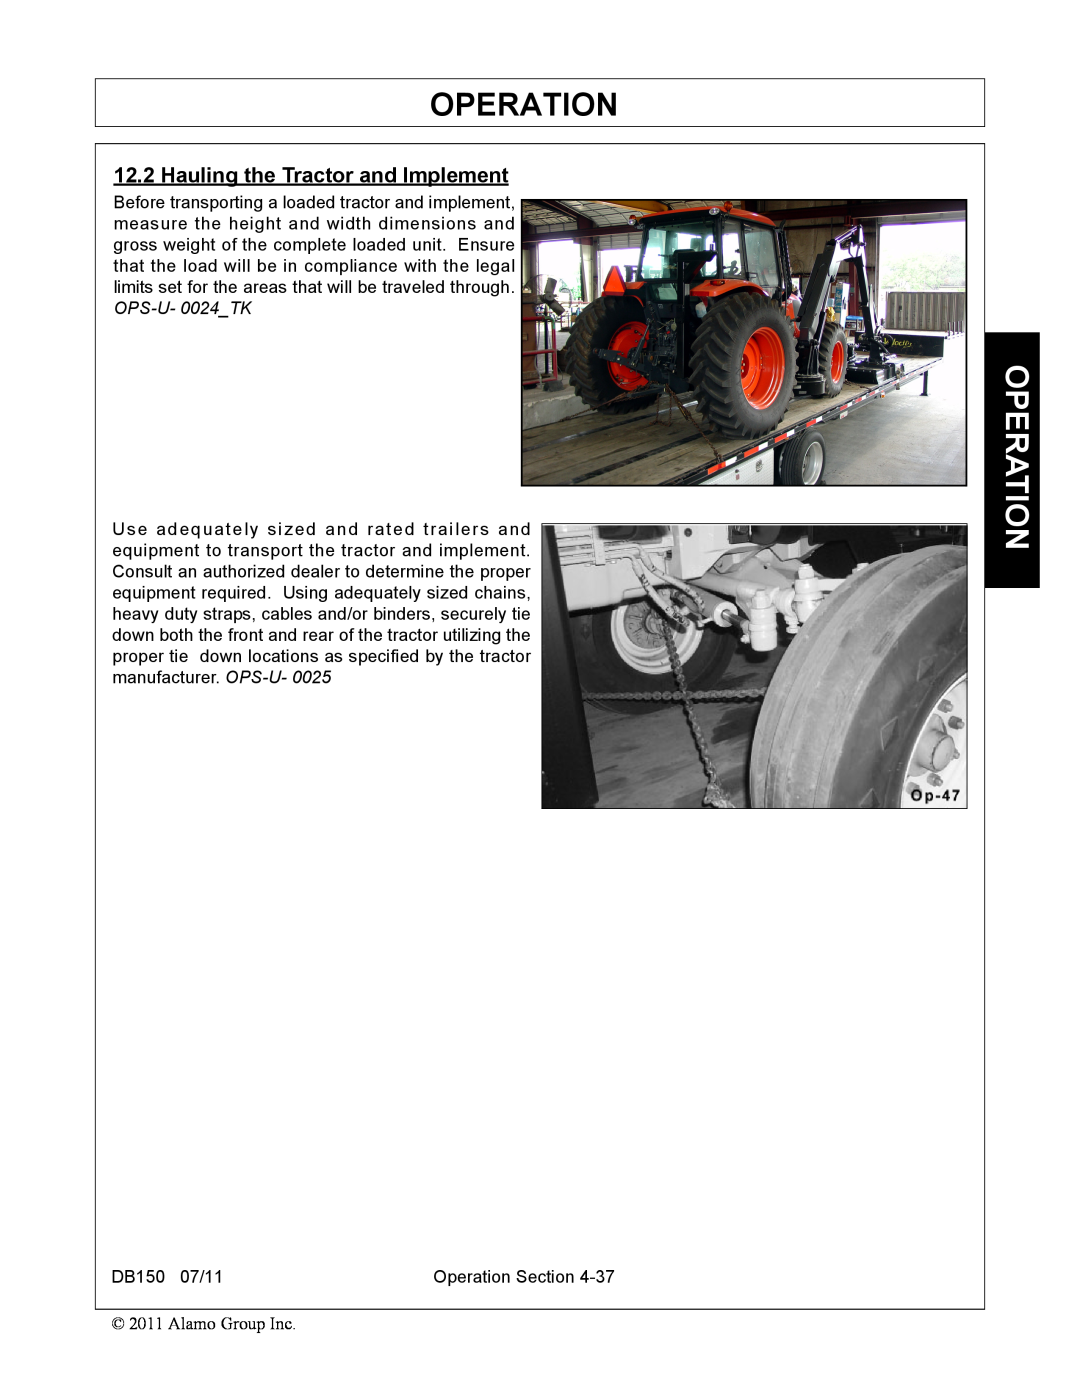 Rhino Mounts DB150 manual Operation, Hauling the Tractor and Implement 